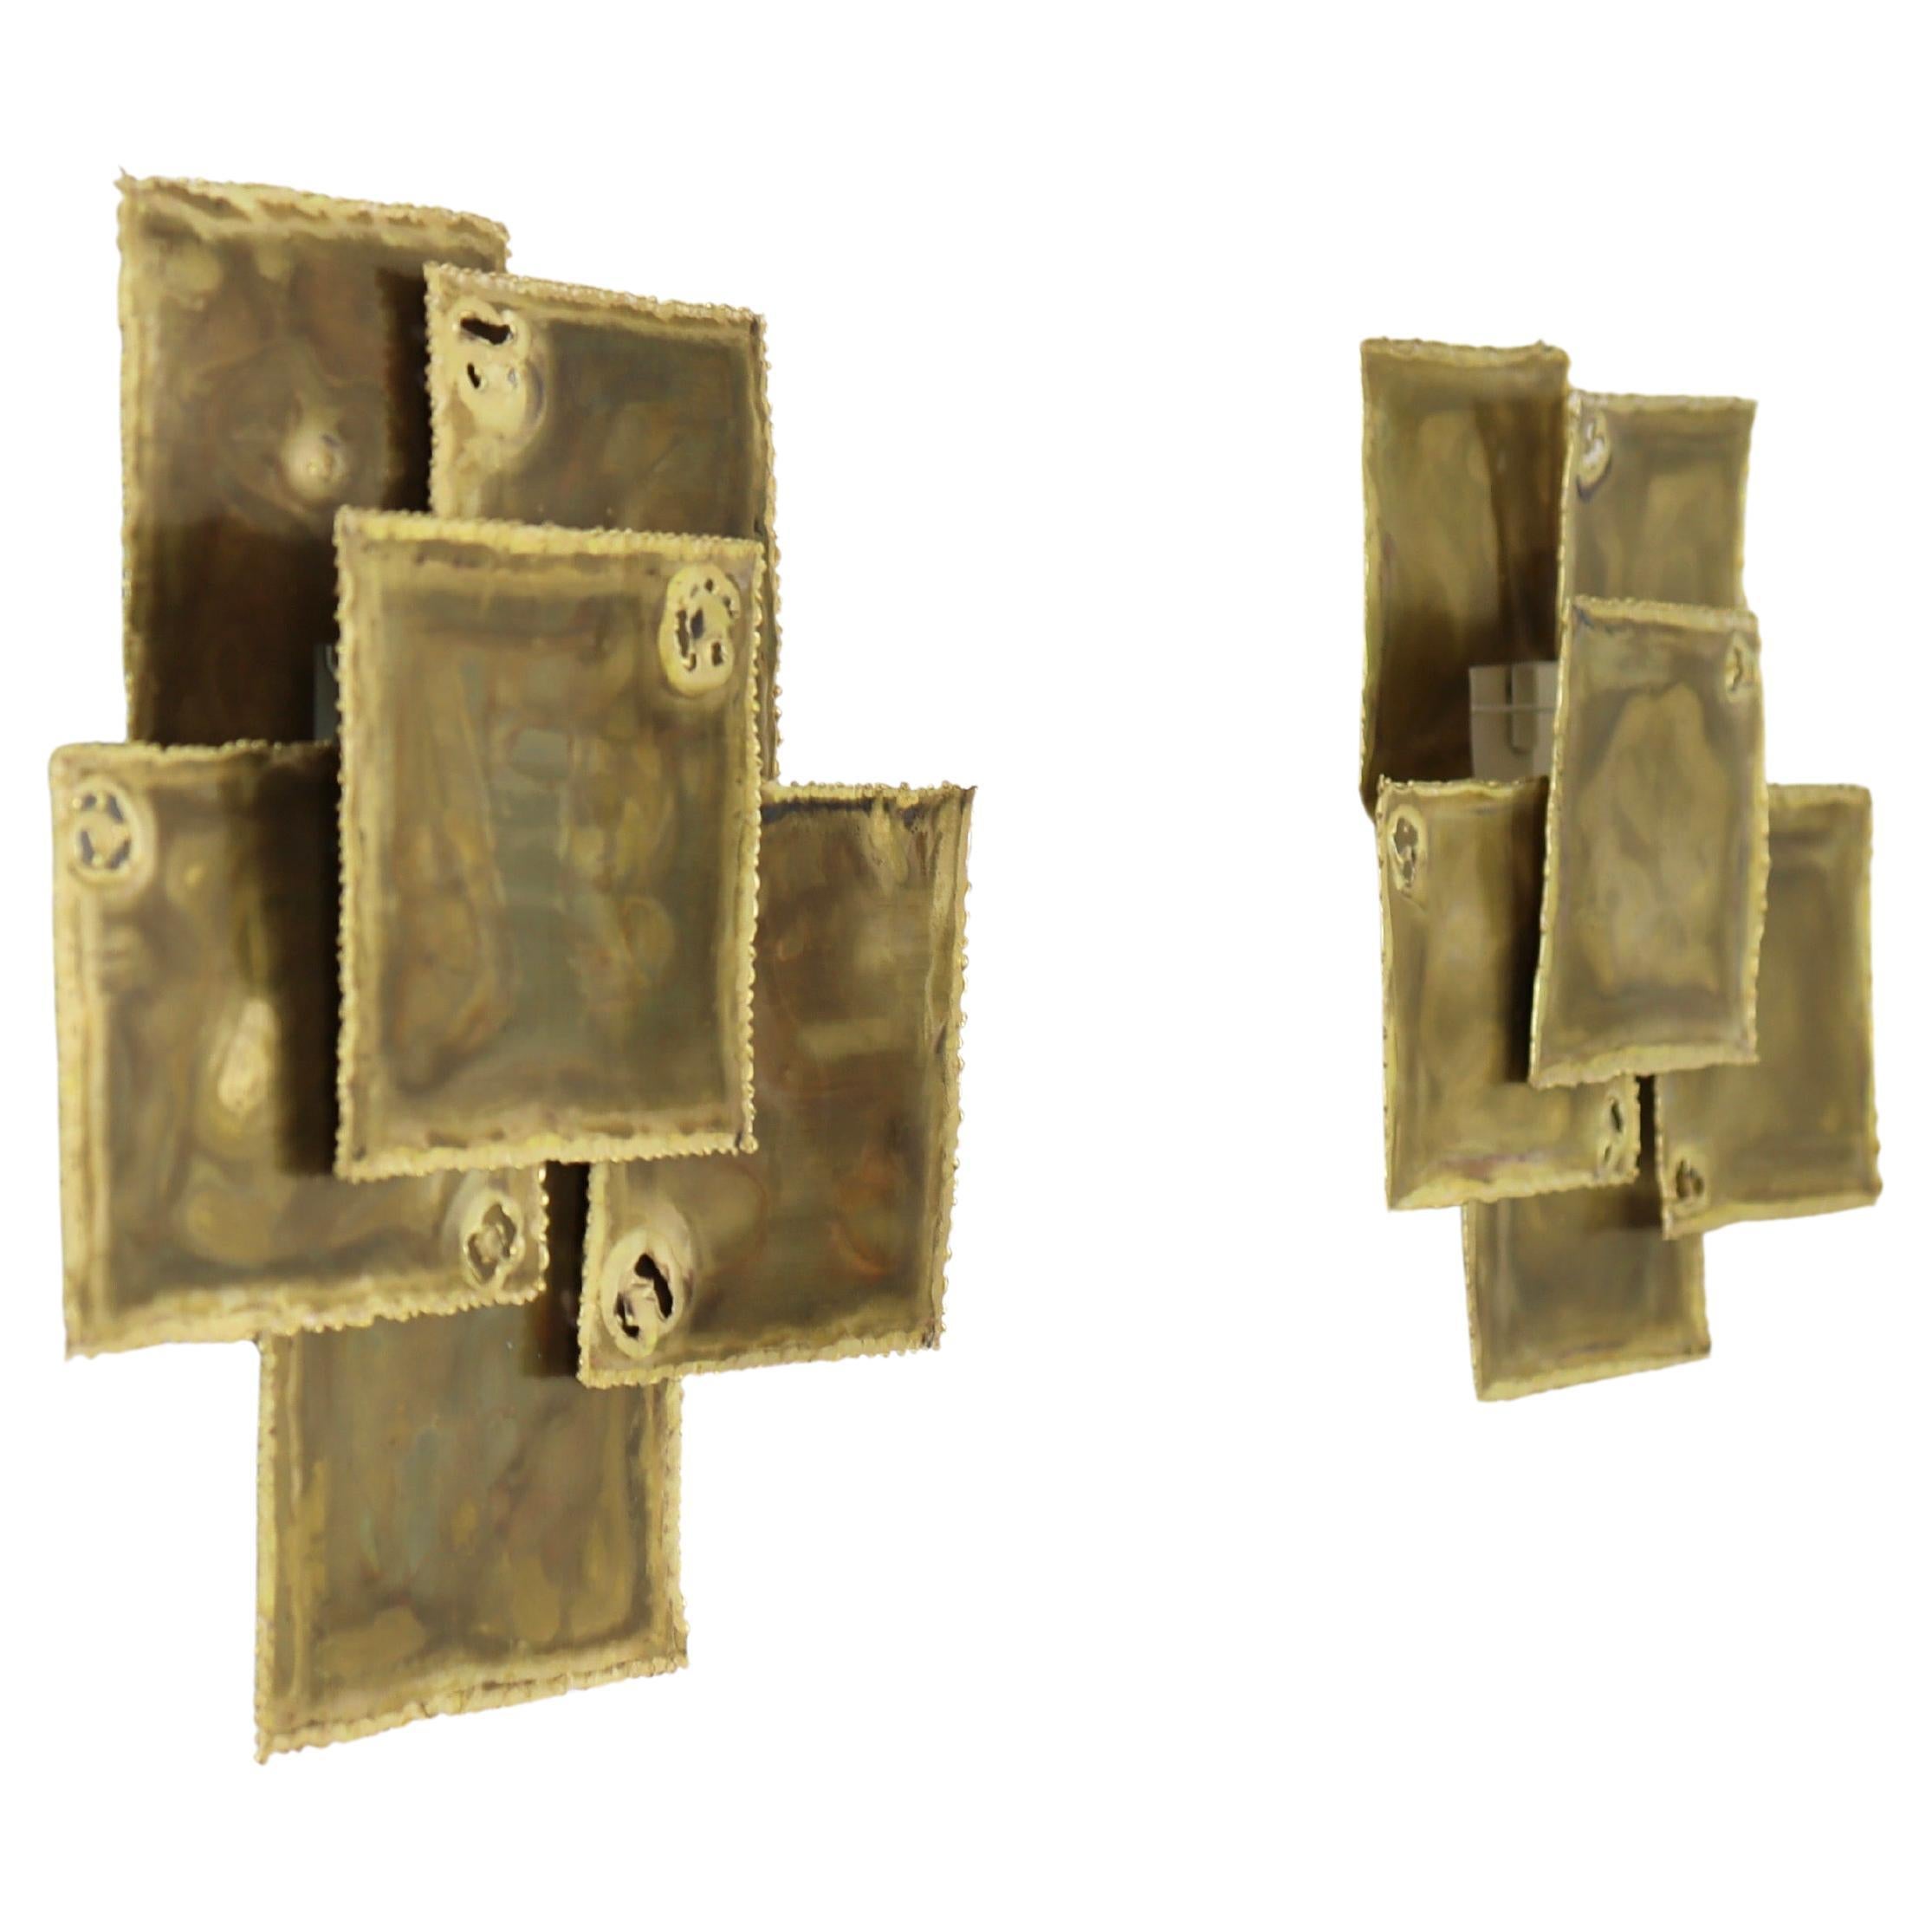 Pair of Large Brass Wall Lamps by Svend Aage Holm Sorensen, 1960s, Denmark For Sale